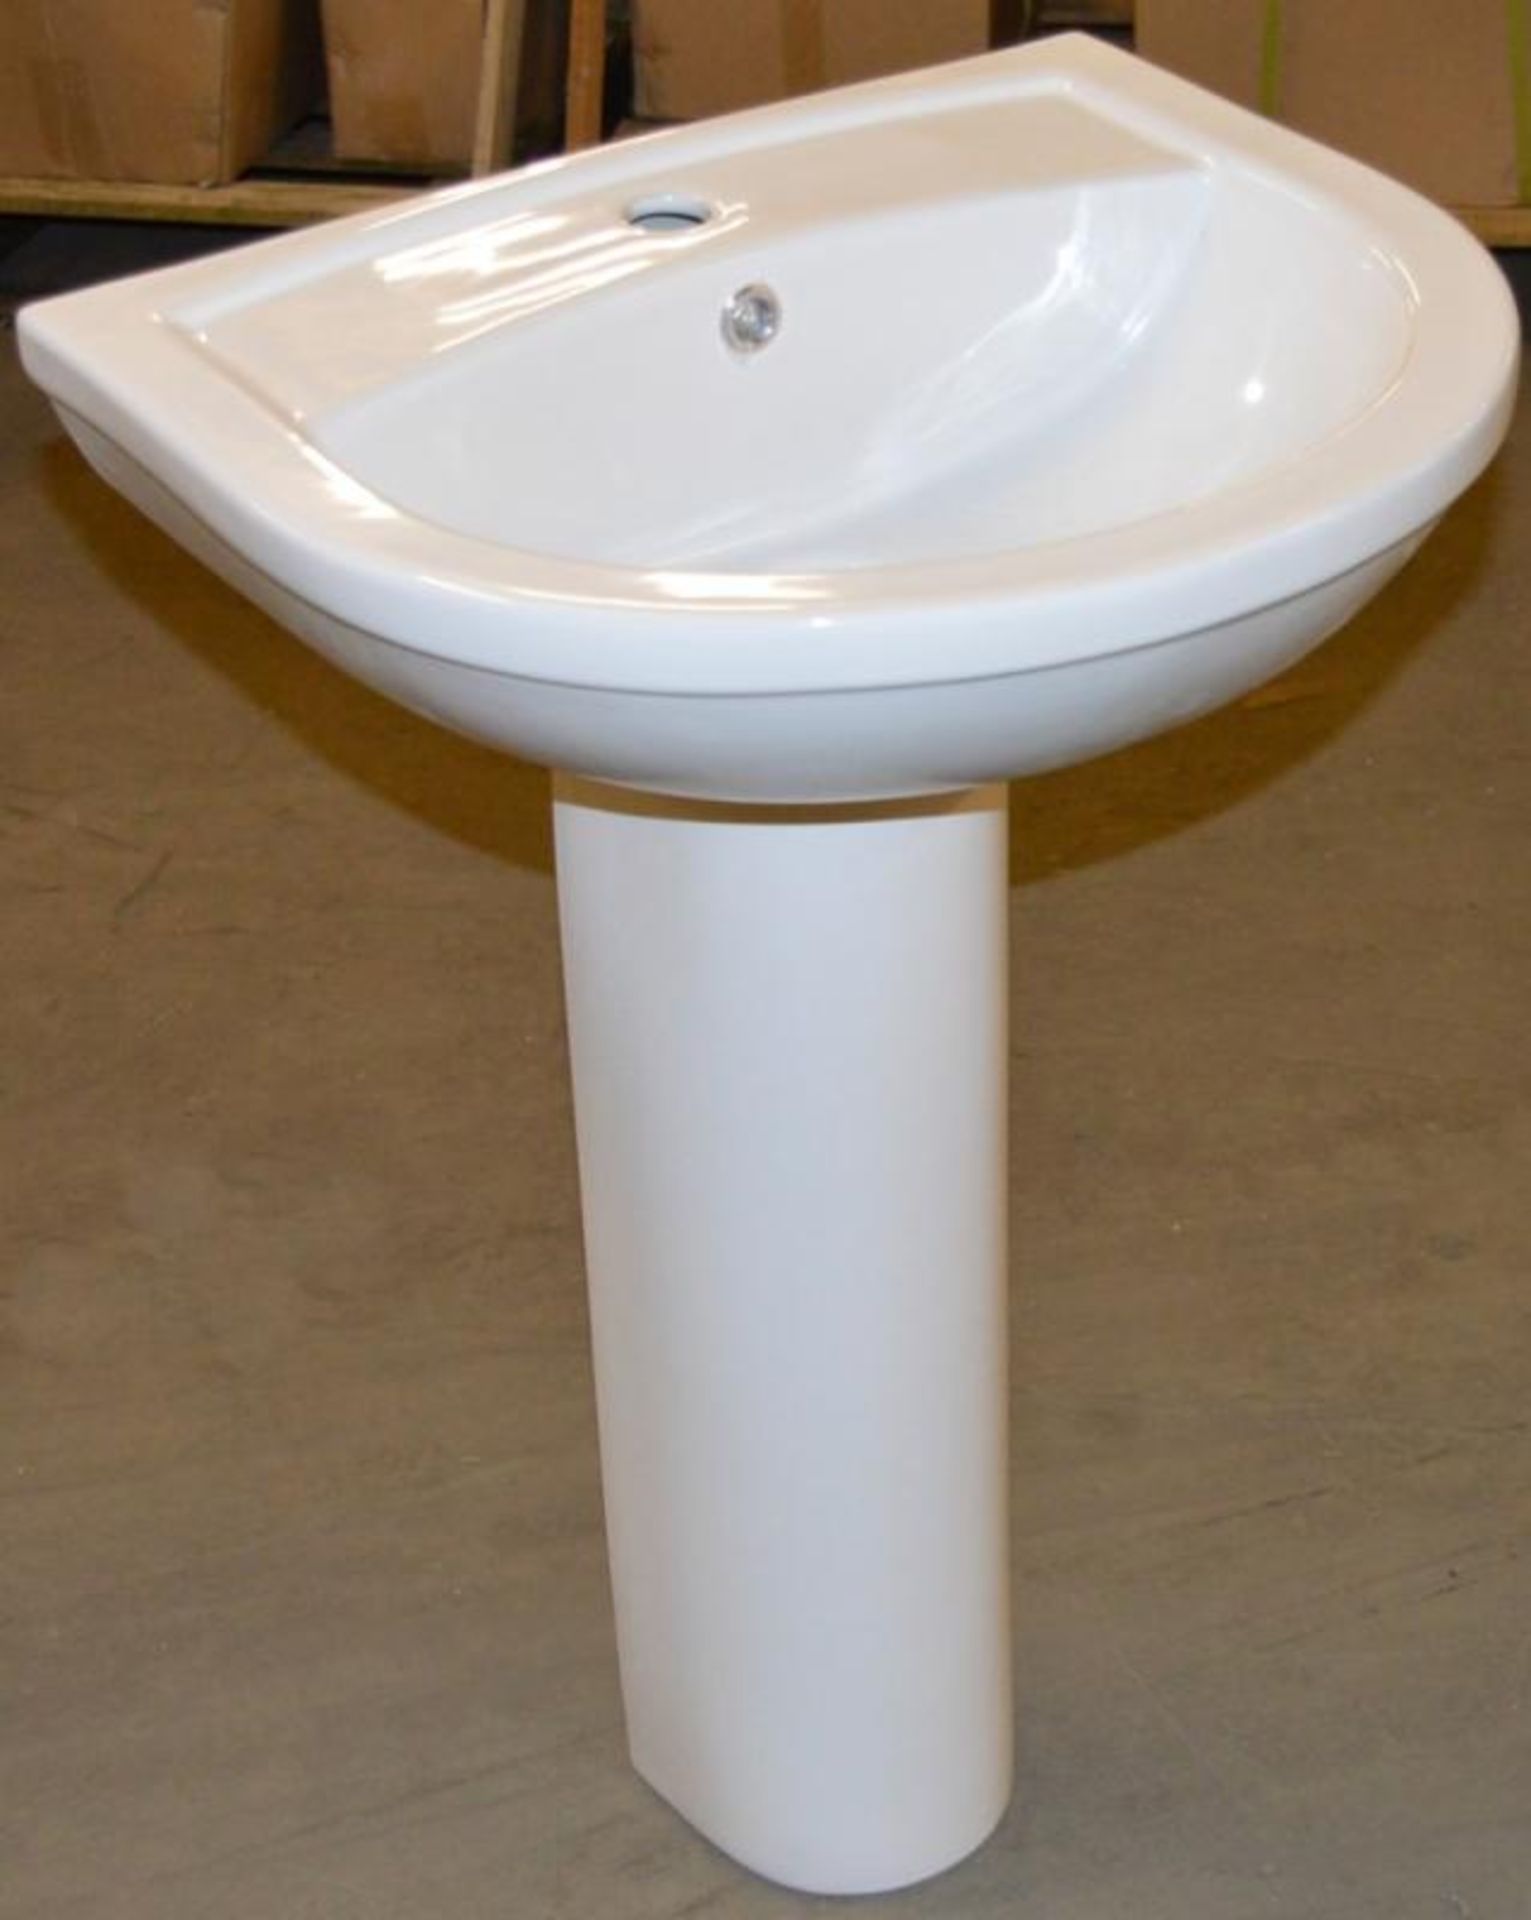 1 x Contemporary Sink Basin With Pedestal - Unused Boxed Stock - CL190 - Ref GIL036 - Location: - Image 3 of 3